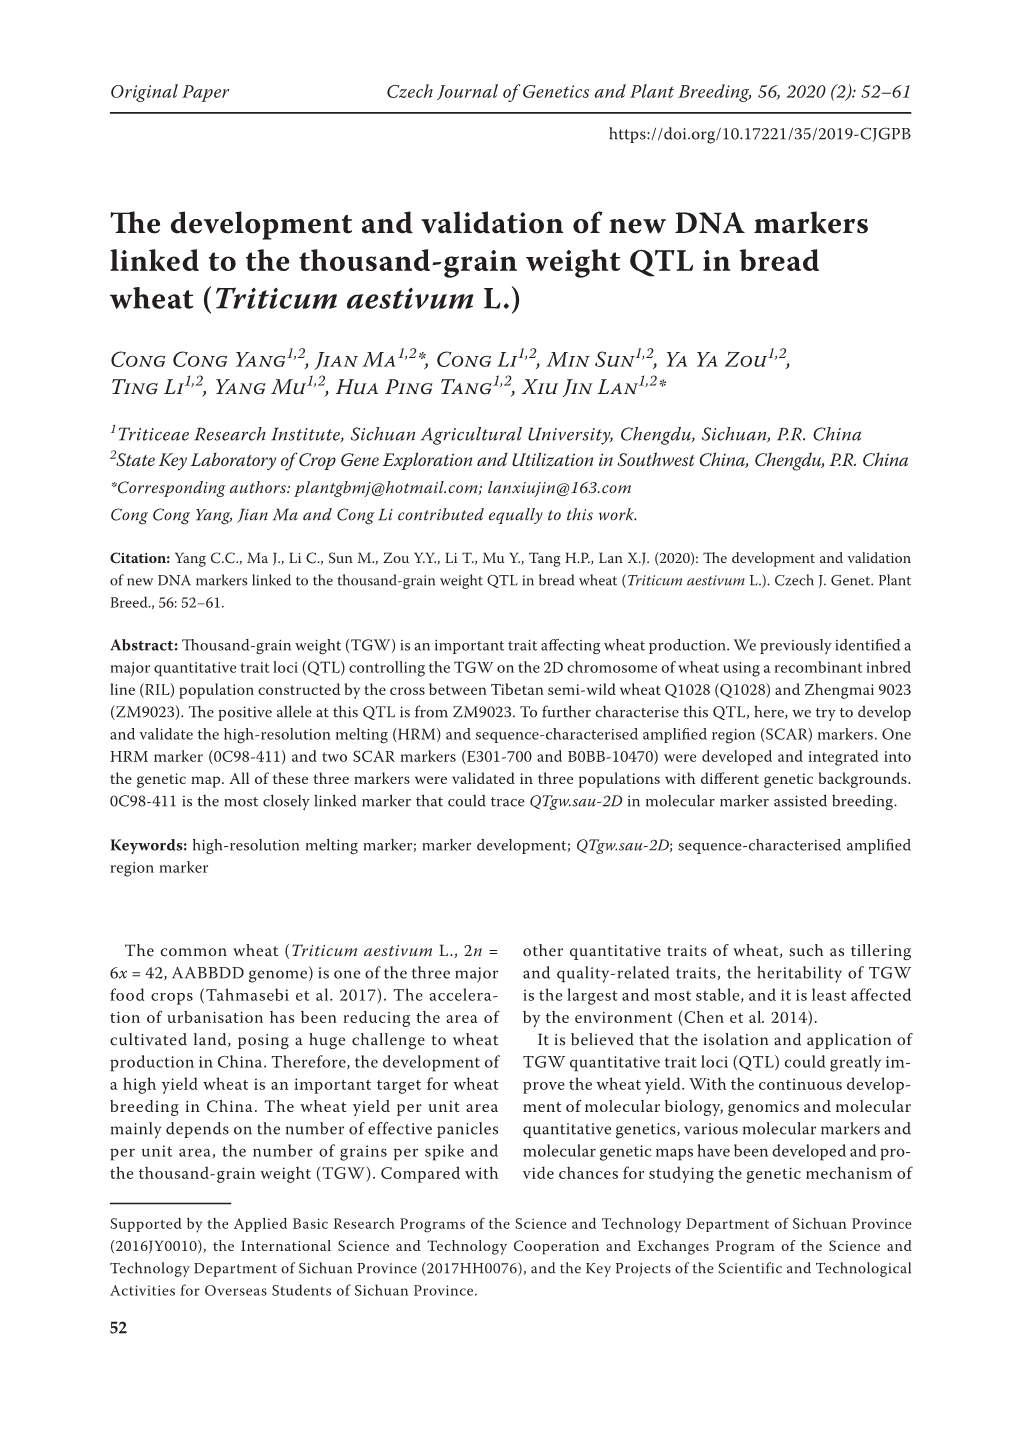 The Development and Validation of New DNA Markers Linked to the Thousand-Grain Weight QTL in Bread Wheat (Triticum Aestivum L.)